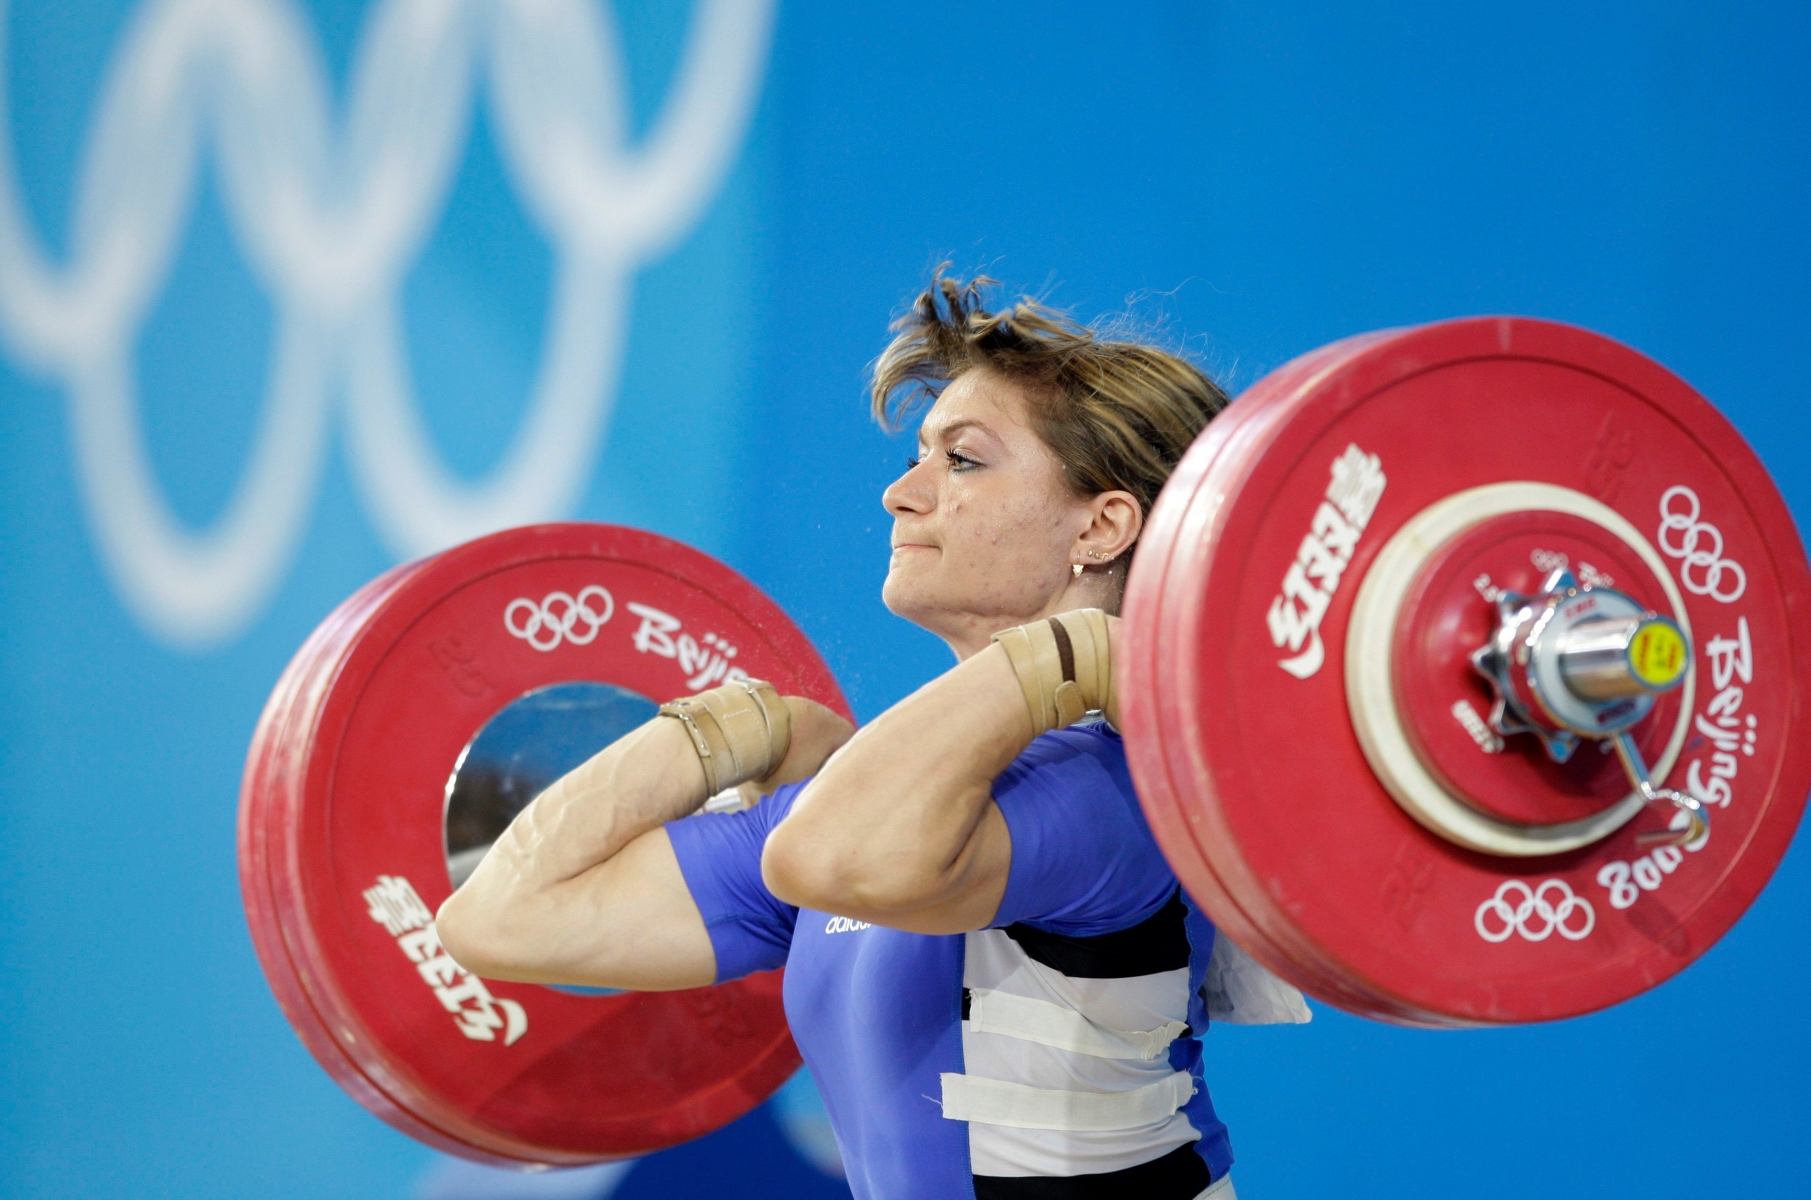 FILE In this Tuesday, Aug. 12, 2008 file photo silver medalist Irina Nekrassova from Kazakhstan makes a clean and jerk in the women's 63kg weightlifting competition at the 2008 Olympics in Beijing. Kazakhstan says three medalists are among six of its athletes disqualified from previous Olympics over doping. The country's national Olympic committee said in a statement that weightlifters Irina Nekrasova and Maria Grabovetskaya, who won silver and bronze medals respectively at Beijing 2008, and bronze medal-winning wrestler Aset Mambetov, were retroactively disqualified following retests of drug-test samples they gave at those games. (AP Photo/David Guttenfelder, File) KAZAKHSTAN DOPING RETESTS